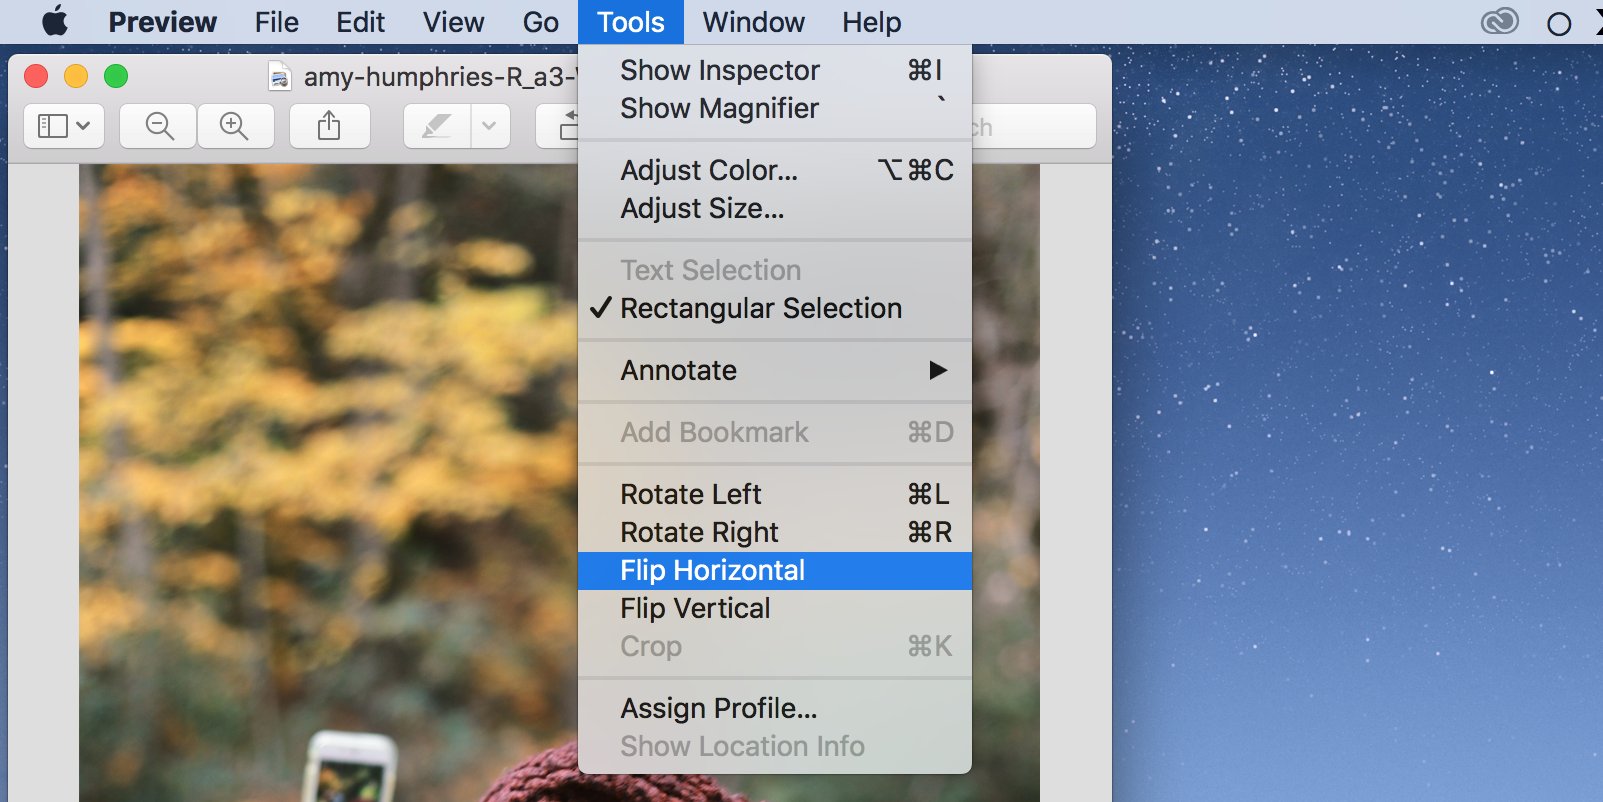 Flip photos option in Preview menu on a Mac.